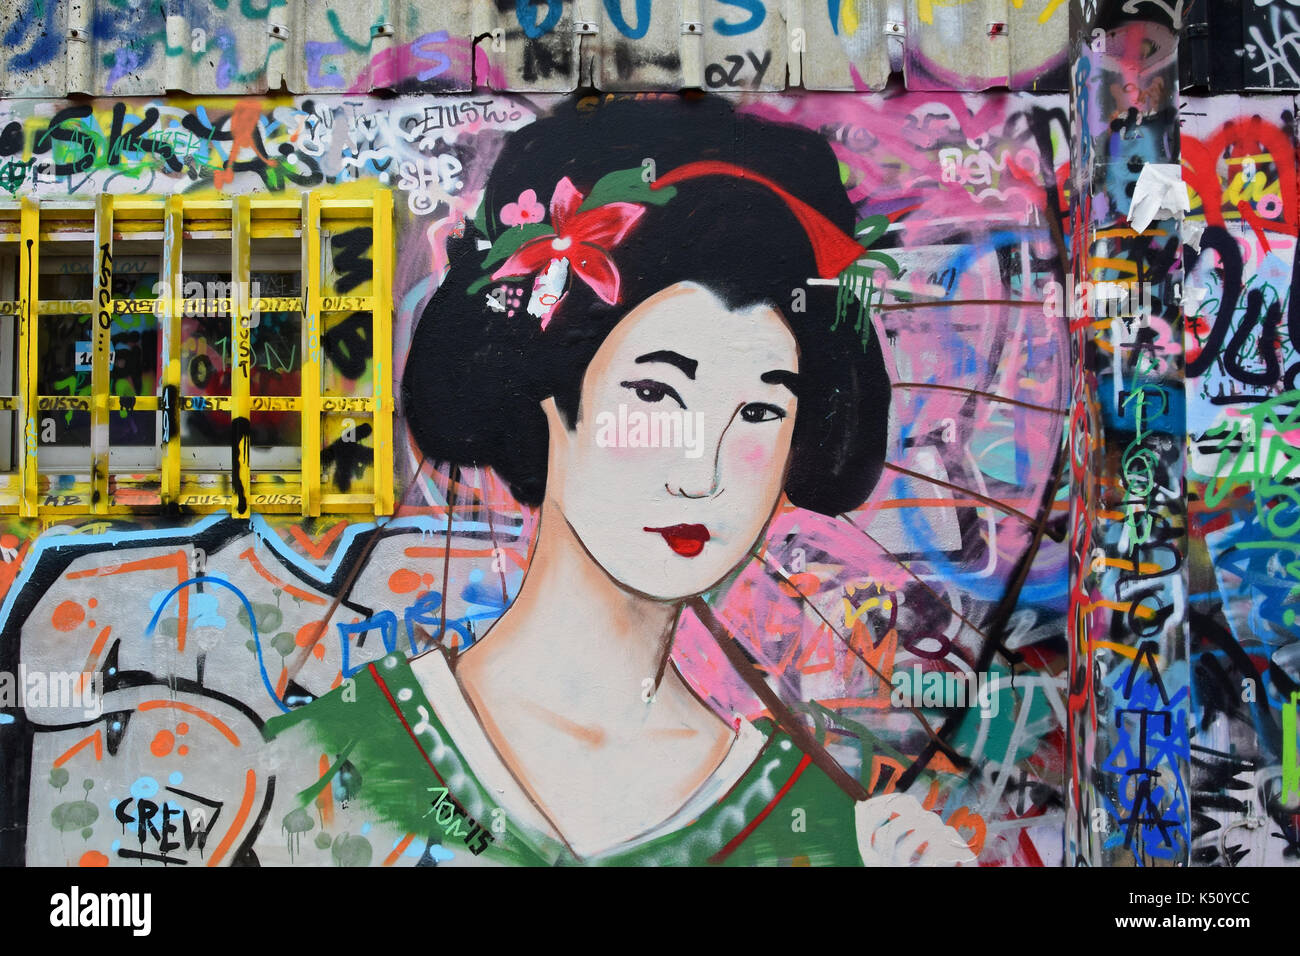 photography graffiti - Alamy hi-res and Japanese images stock